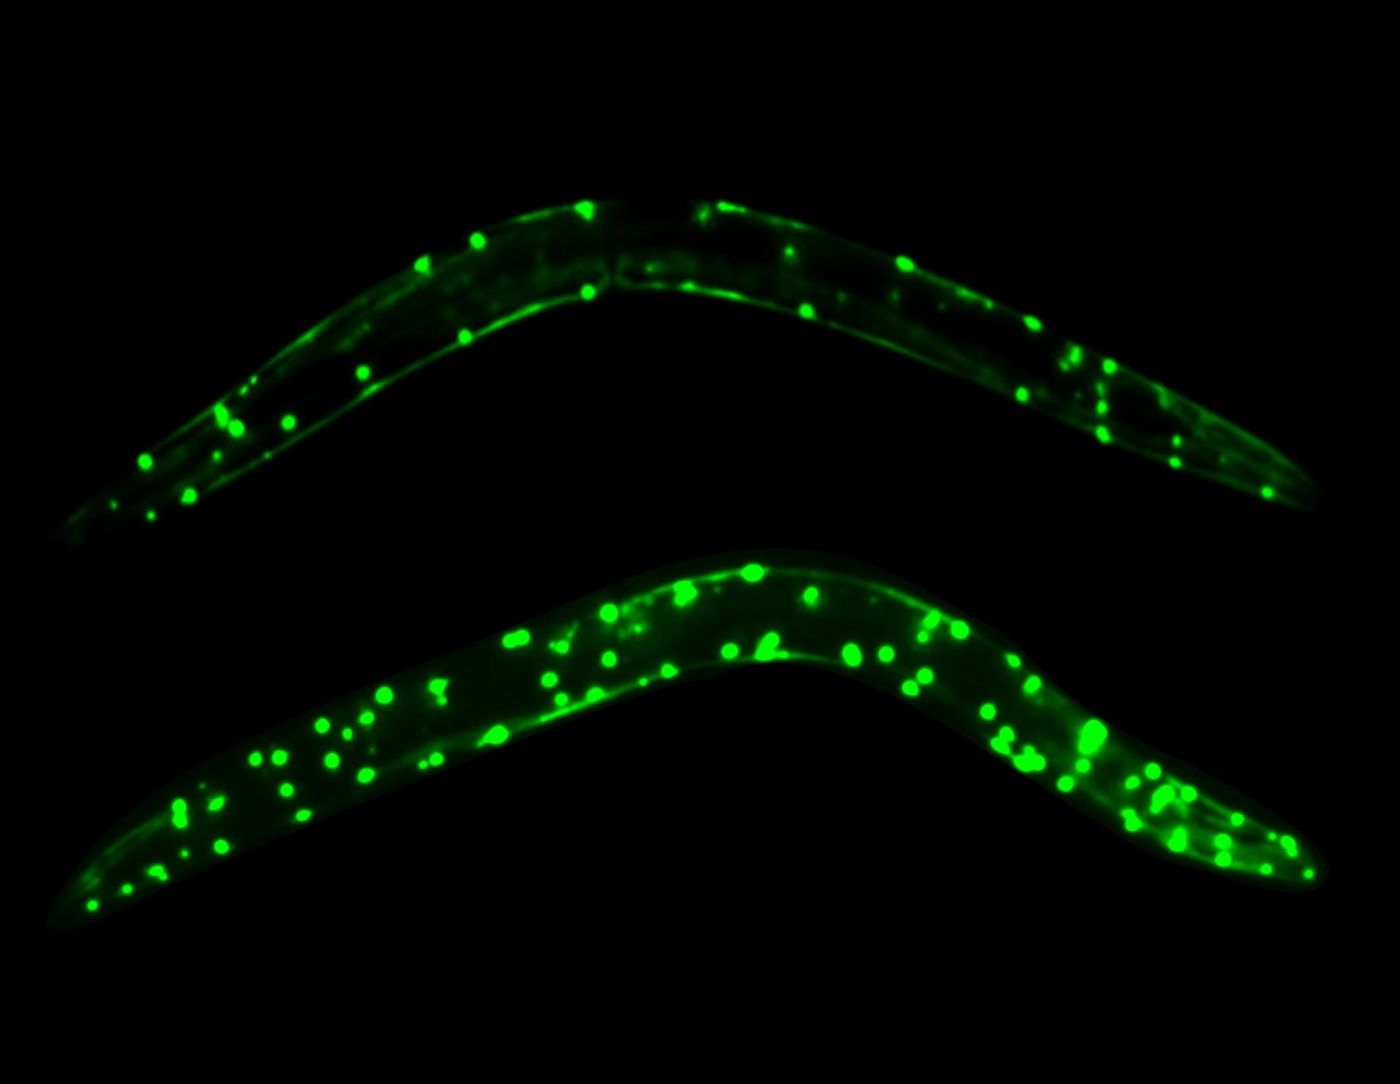 When you decrease autophagy the disease process is exacerbated and when you increase it you get the opposite effect. Aggregation of polyglutamine expansion protein is a hallmark of Huntington's disease and other neurodegenerative diseases. The picture shows that there are more aggregates of green fluorescence protein-labelled polyglutamine expansion protein in autophagy deficient worms (bottom) compared to normal animals (top). Credit: Florida Atlantic University